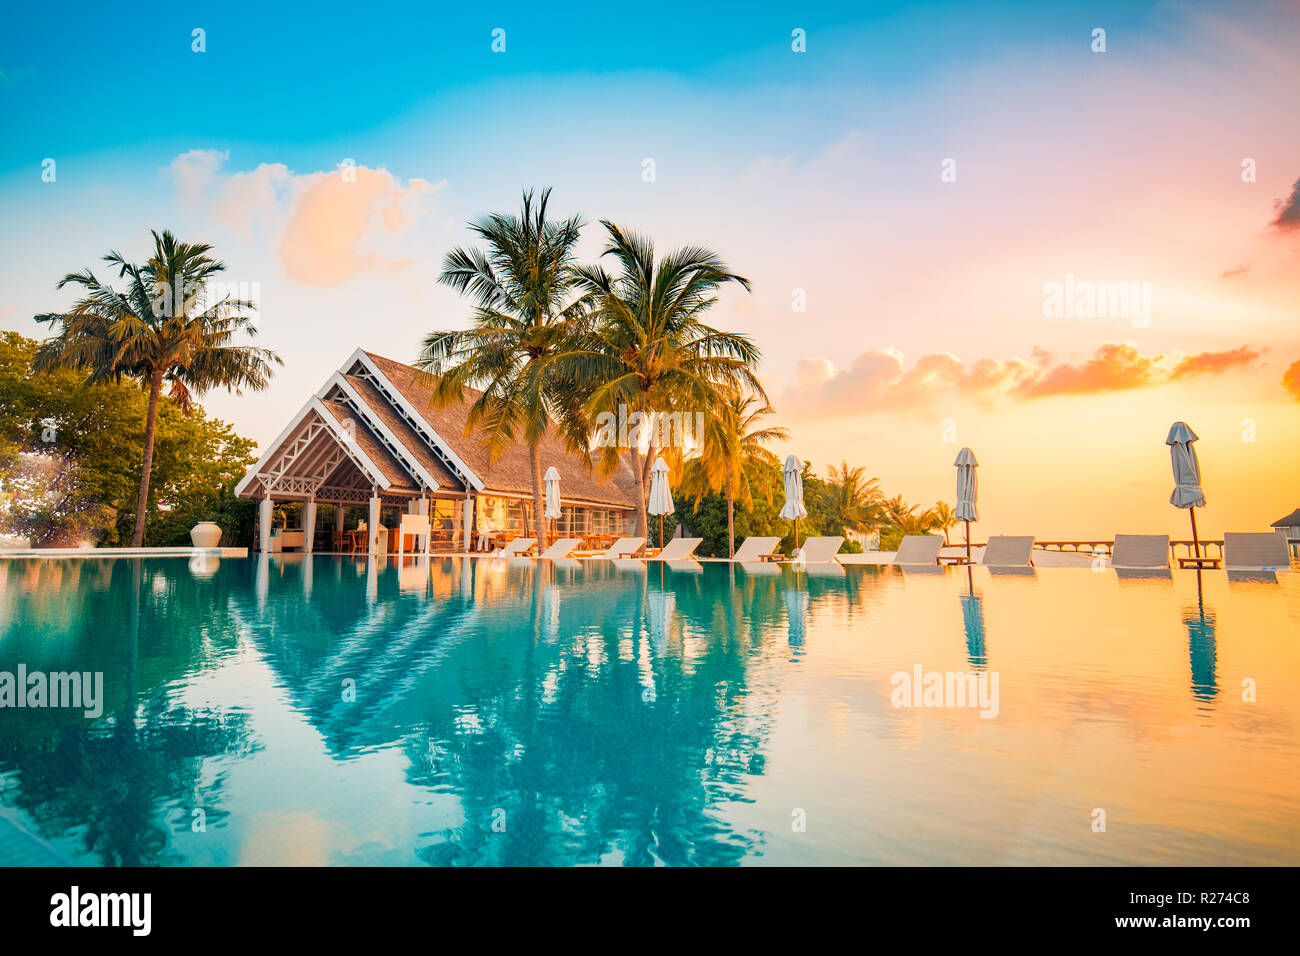 Beautiful poolside and sunset sky. Luxurious tropical beach landscape, deck chairs and loungers and water reflection. Stock Photo